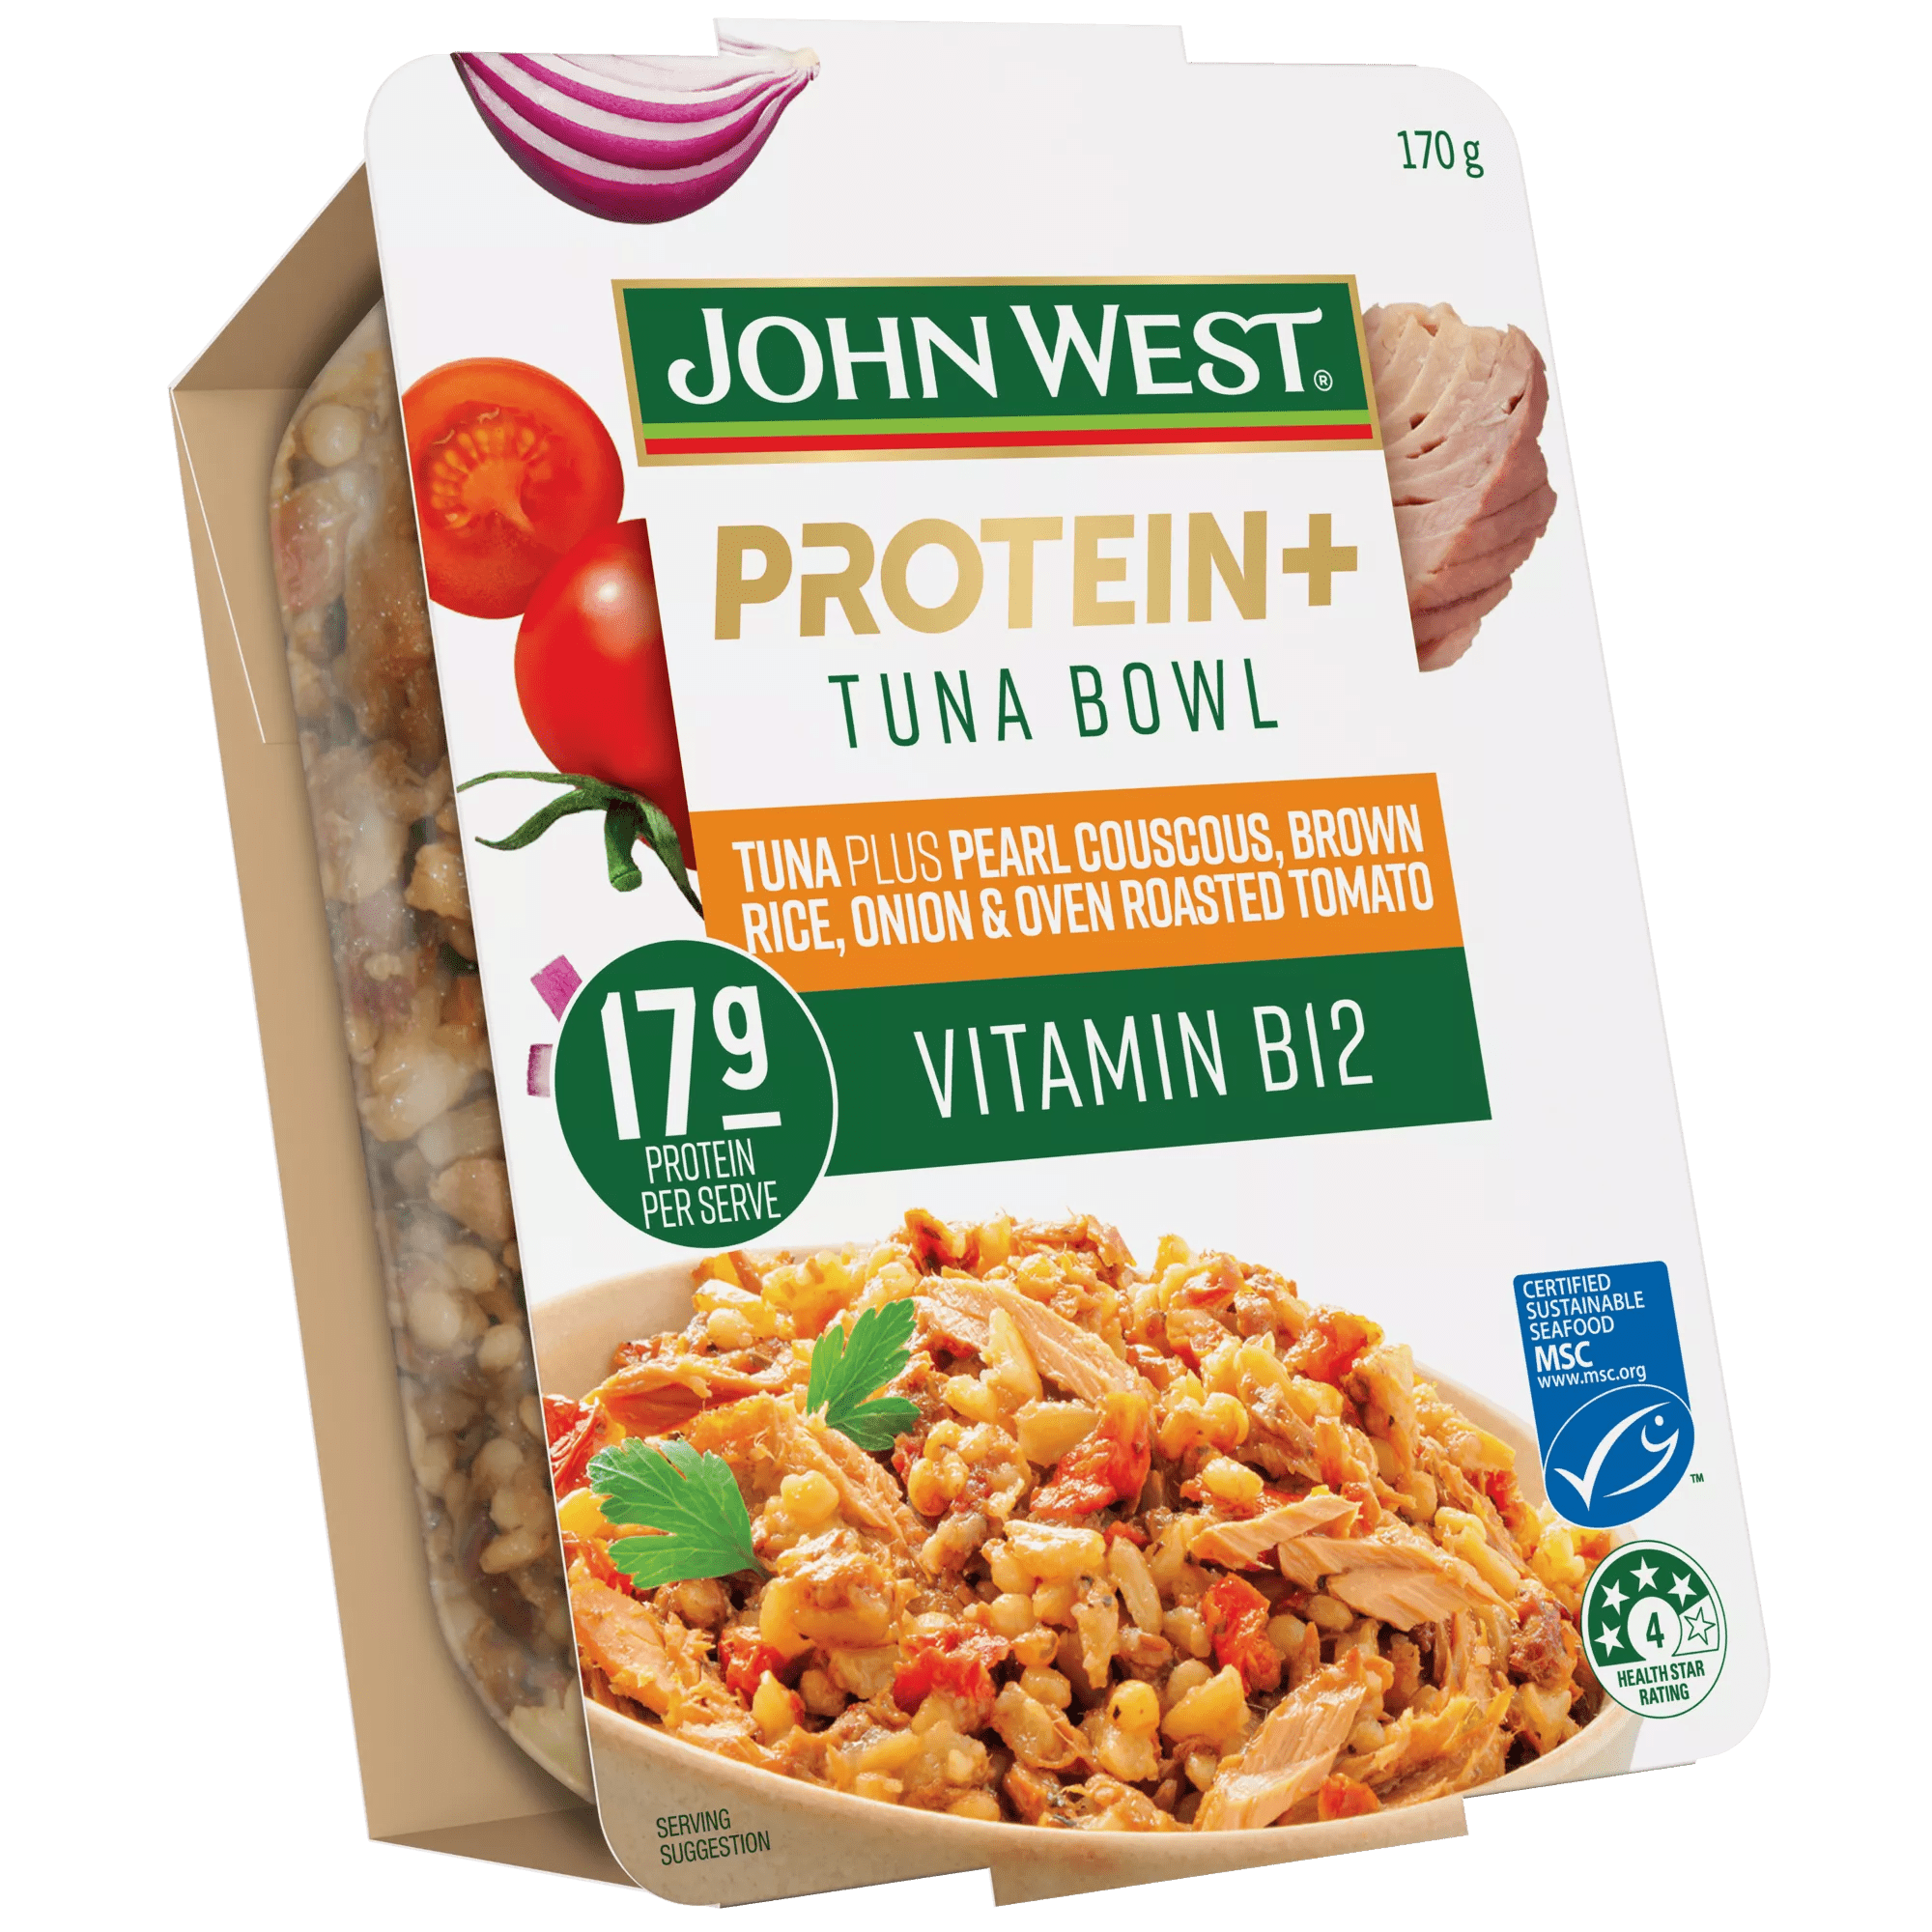 JW Protein+ Vitamin B12 Tuna Pearl Couscous, Brown Rice, Oven Roasted Tomato & Onion 170g